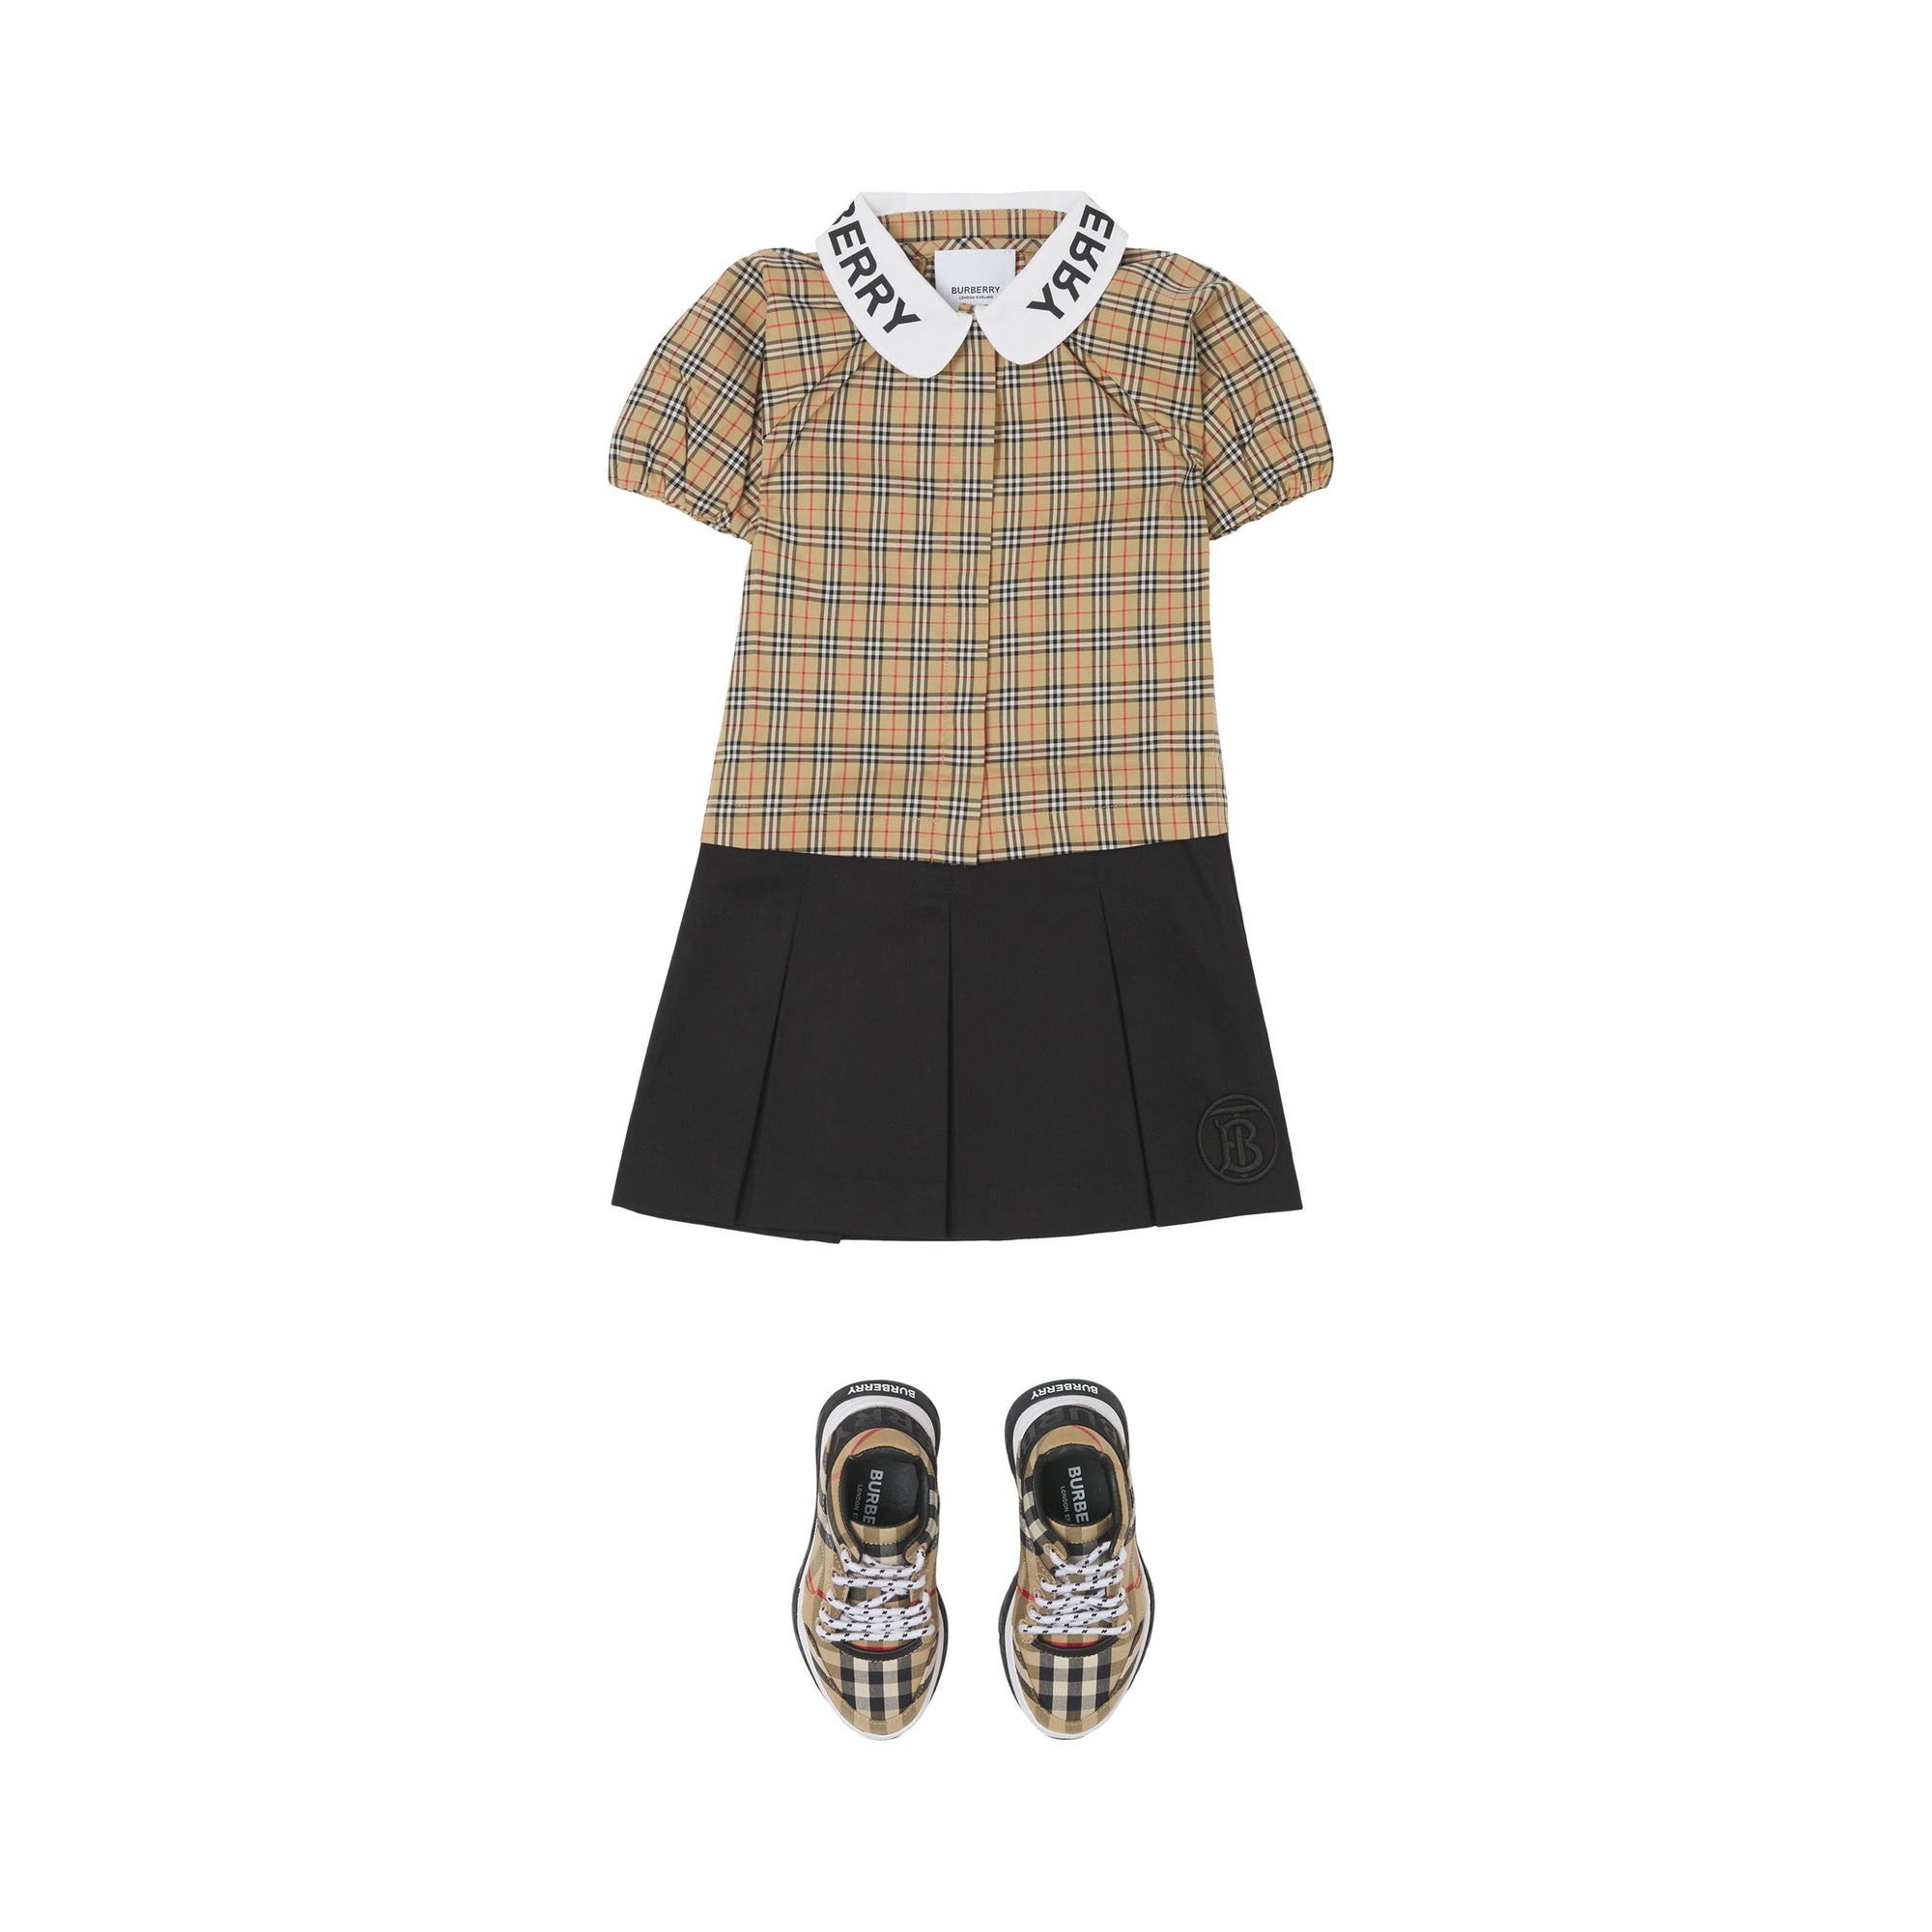 ARCHIVE BEIGE IP CHK Childrens INF GIRL SHIRT&BLOUS